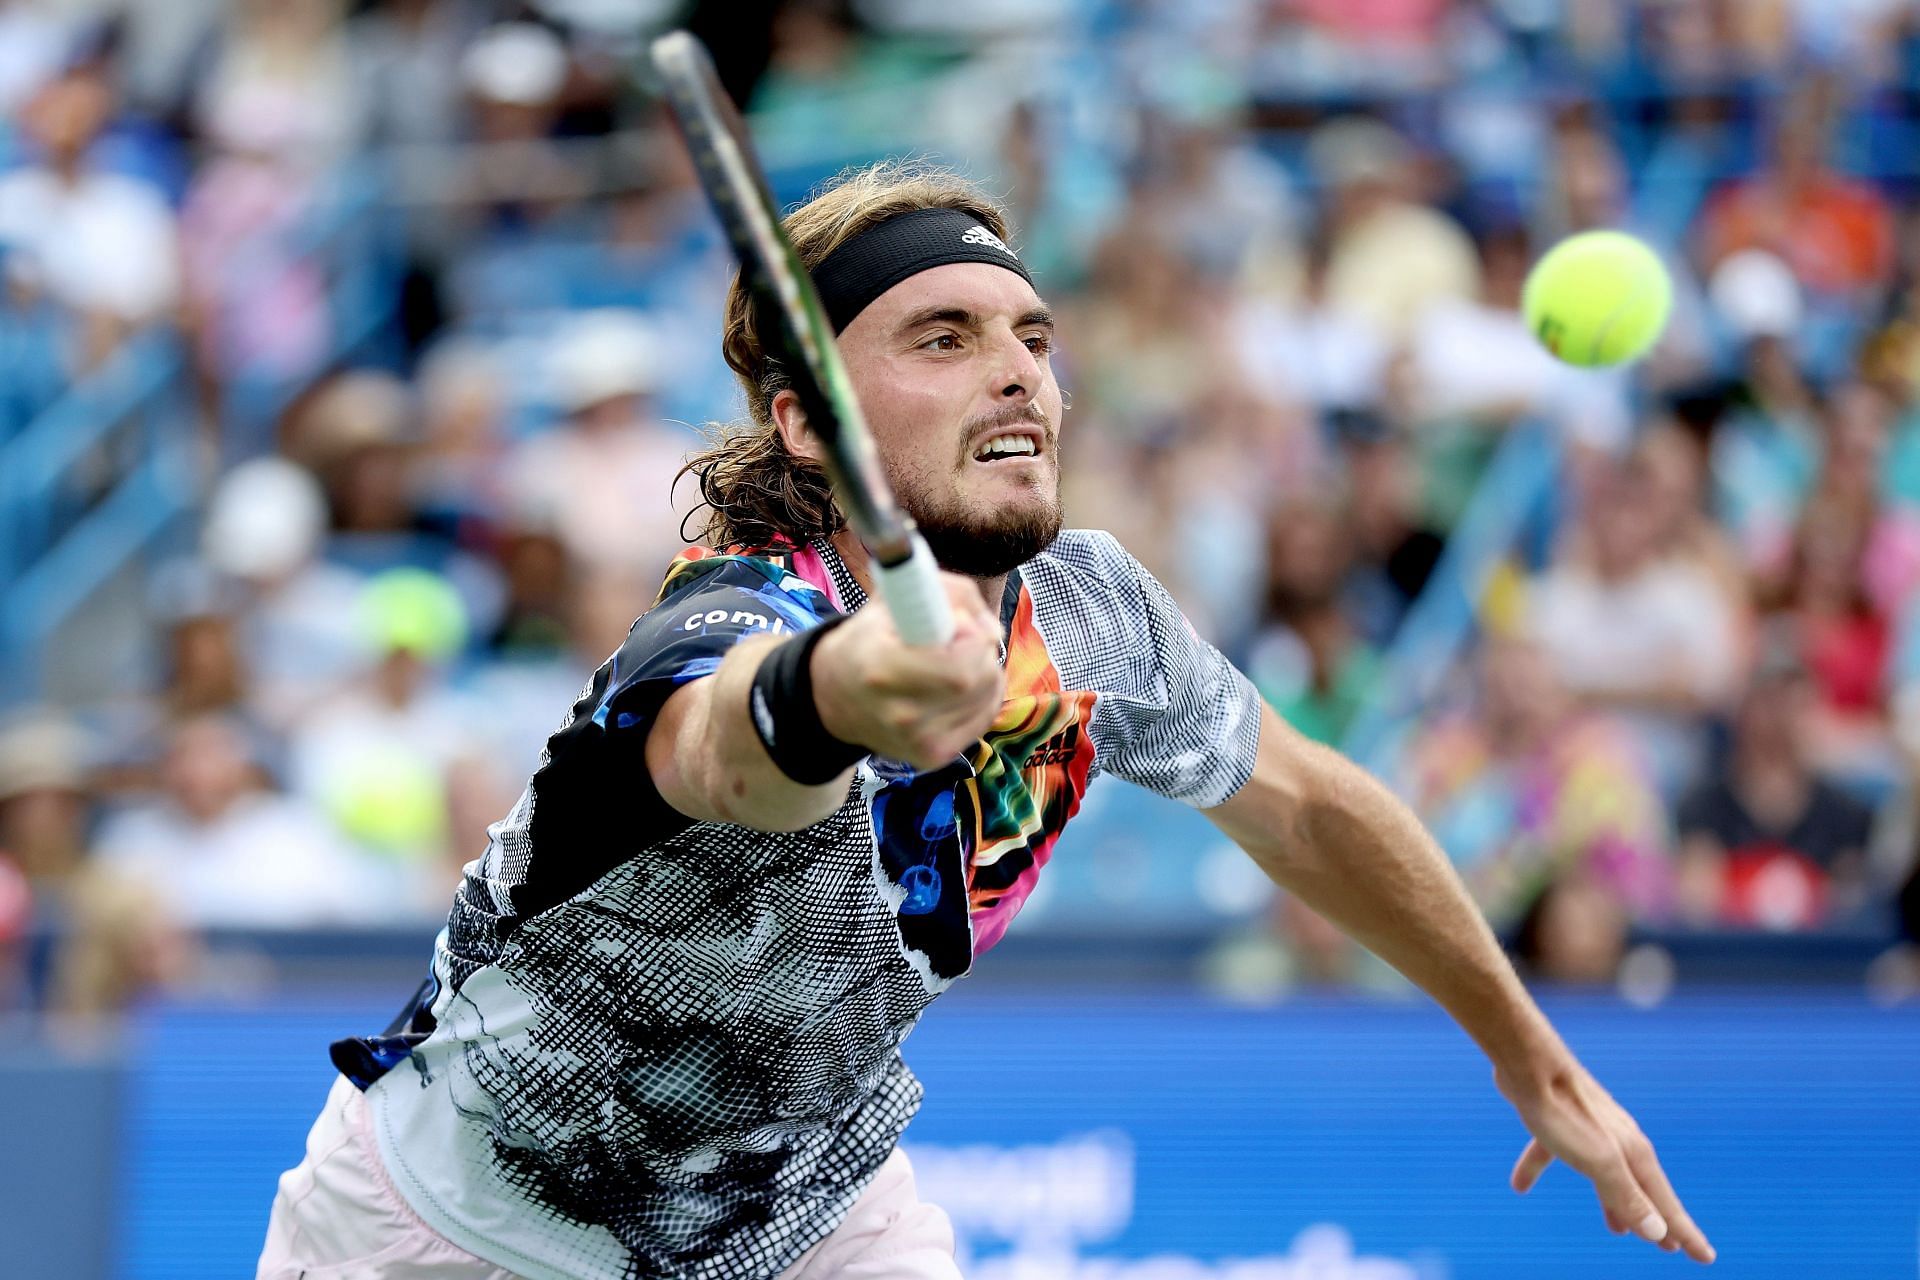 Stefanos Tsitsipas will look to have a good run at the US Open